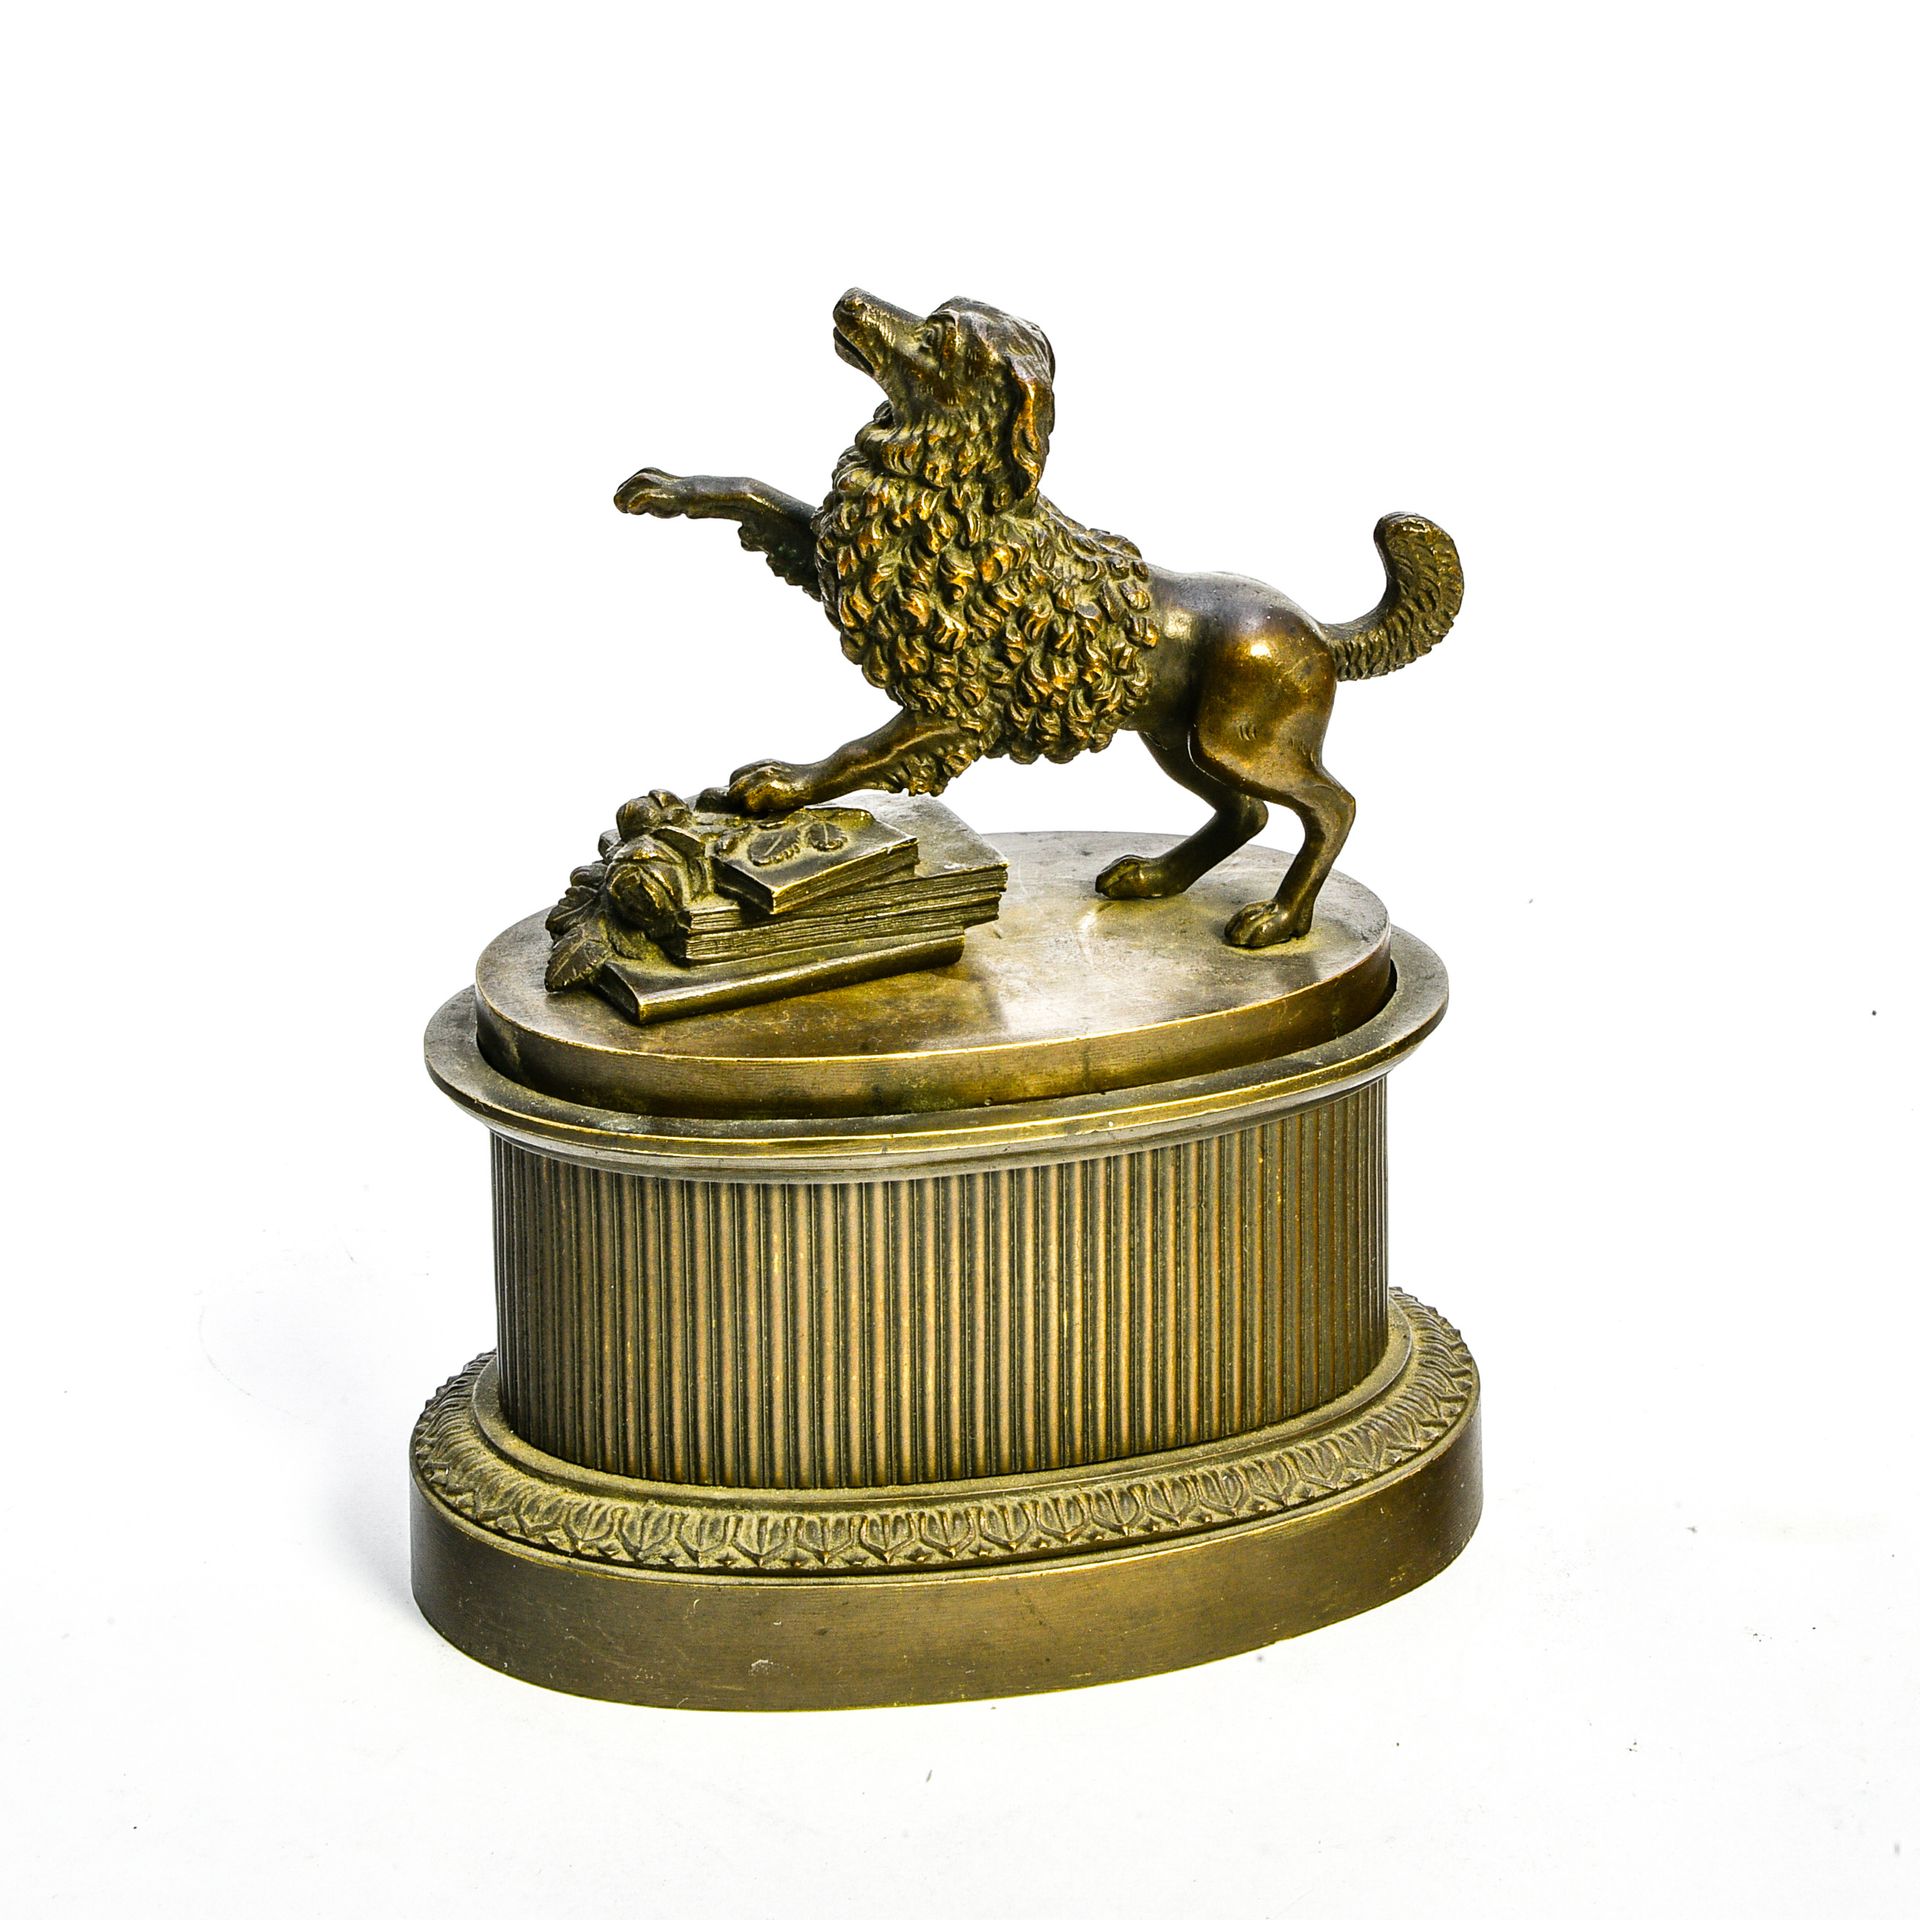 Null Wise poodle inkwell

19TH CENTURY WORK

Bronze with brown patina, cover ado&hellip;